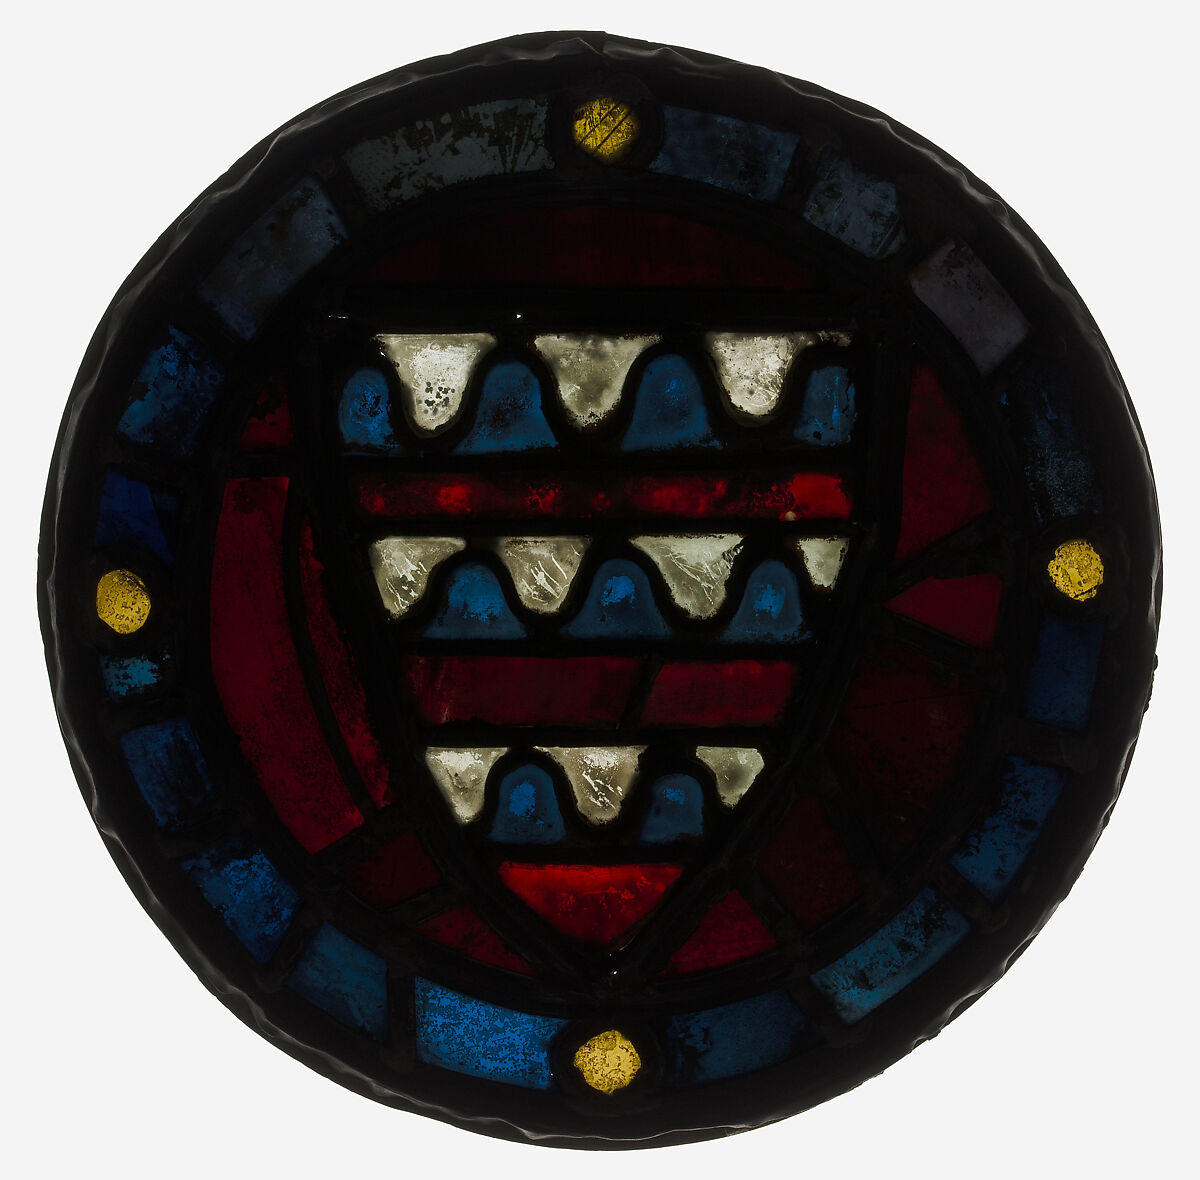 Roundel with the Arms of Coucy, Pot-metal glass and vitreous paint, British (?)